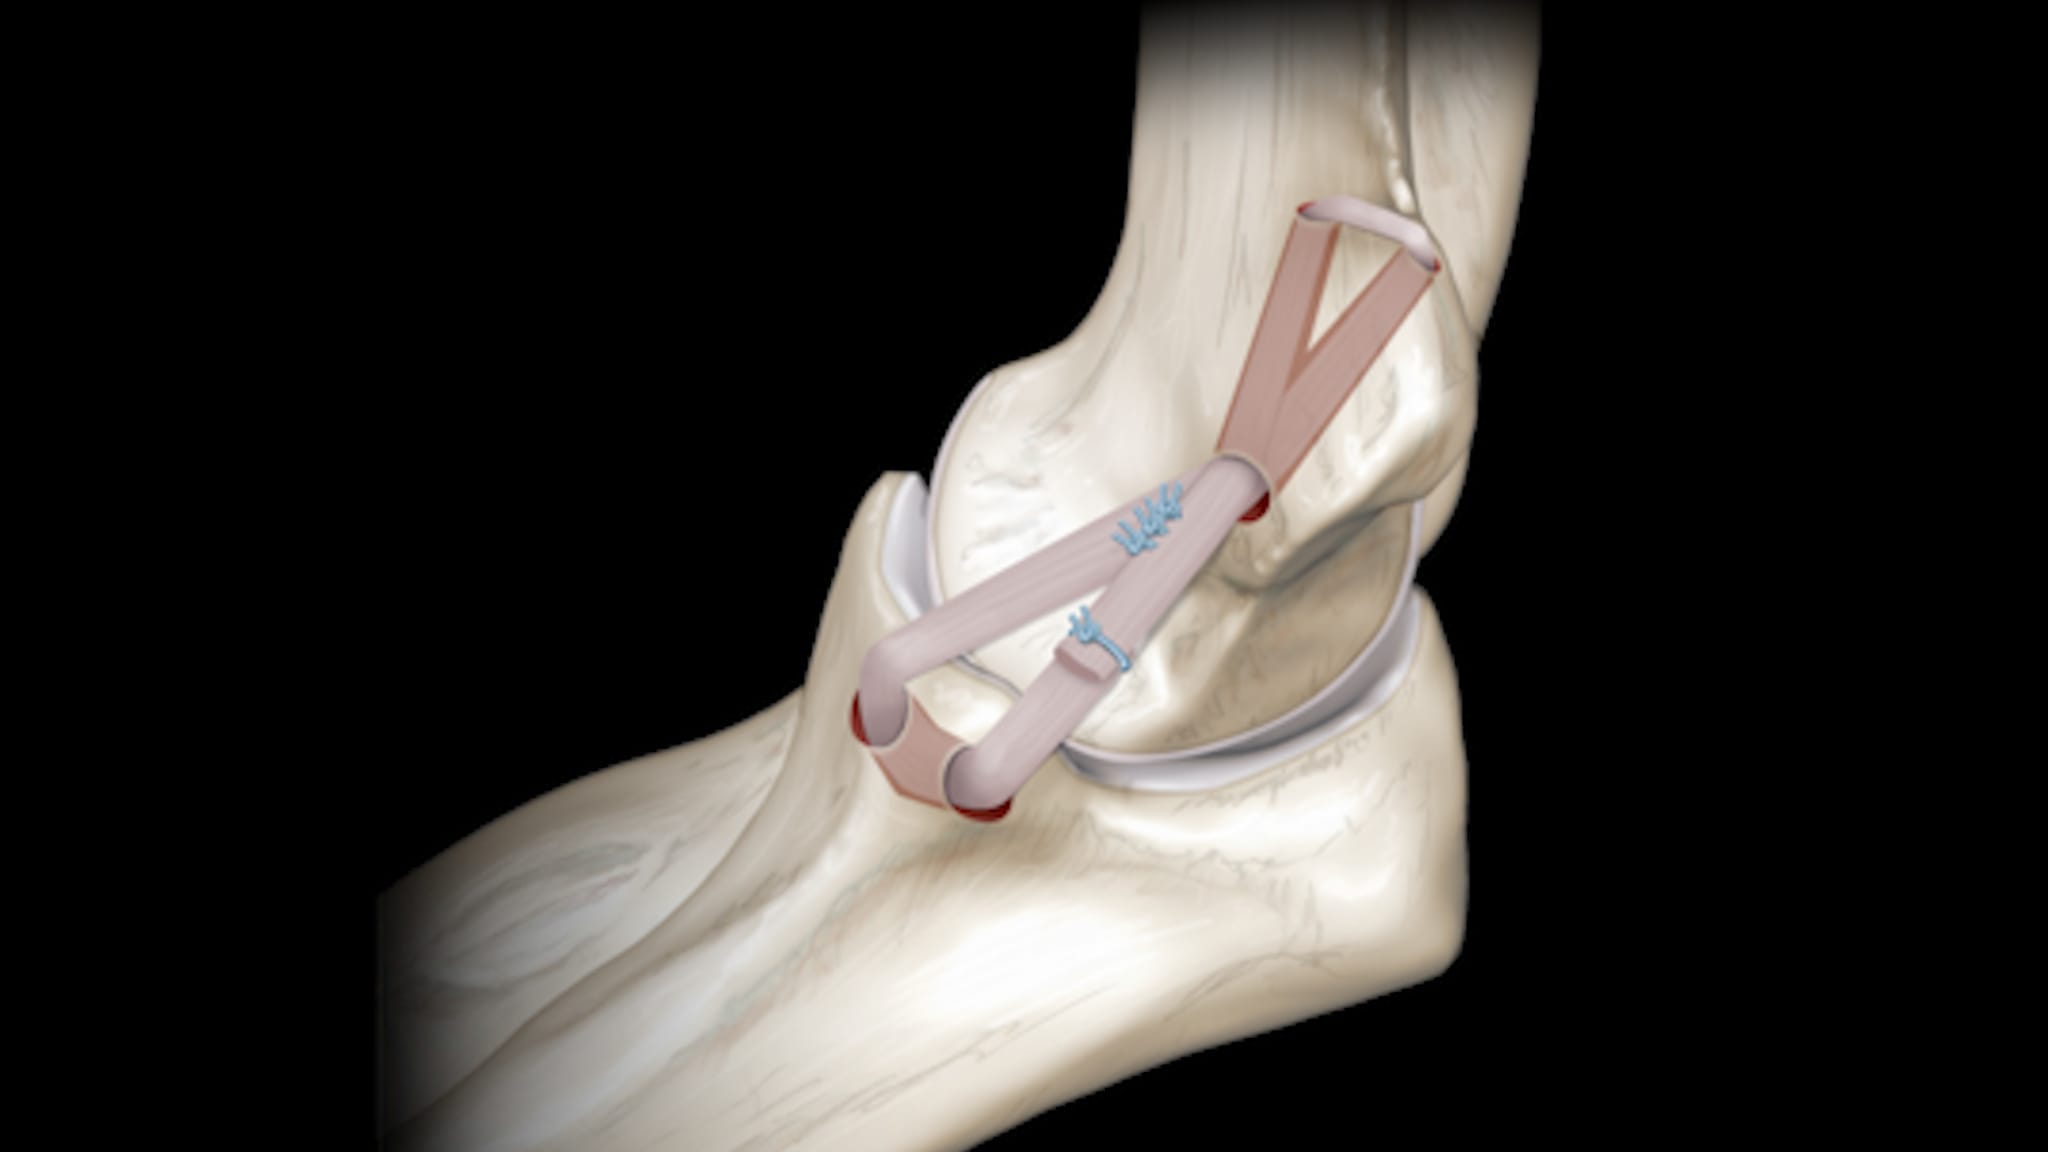 Dual-Docking 4-Ply Elbow Ulnar Collateral Ligament Reconstruction With InternalBrace™ Repair